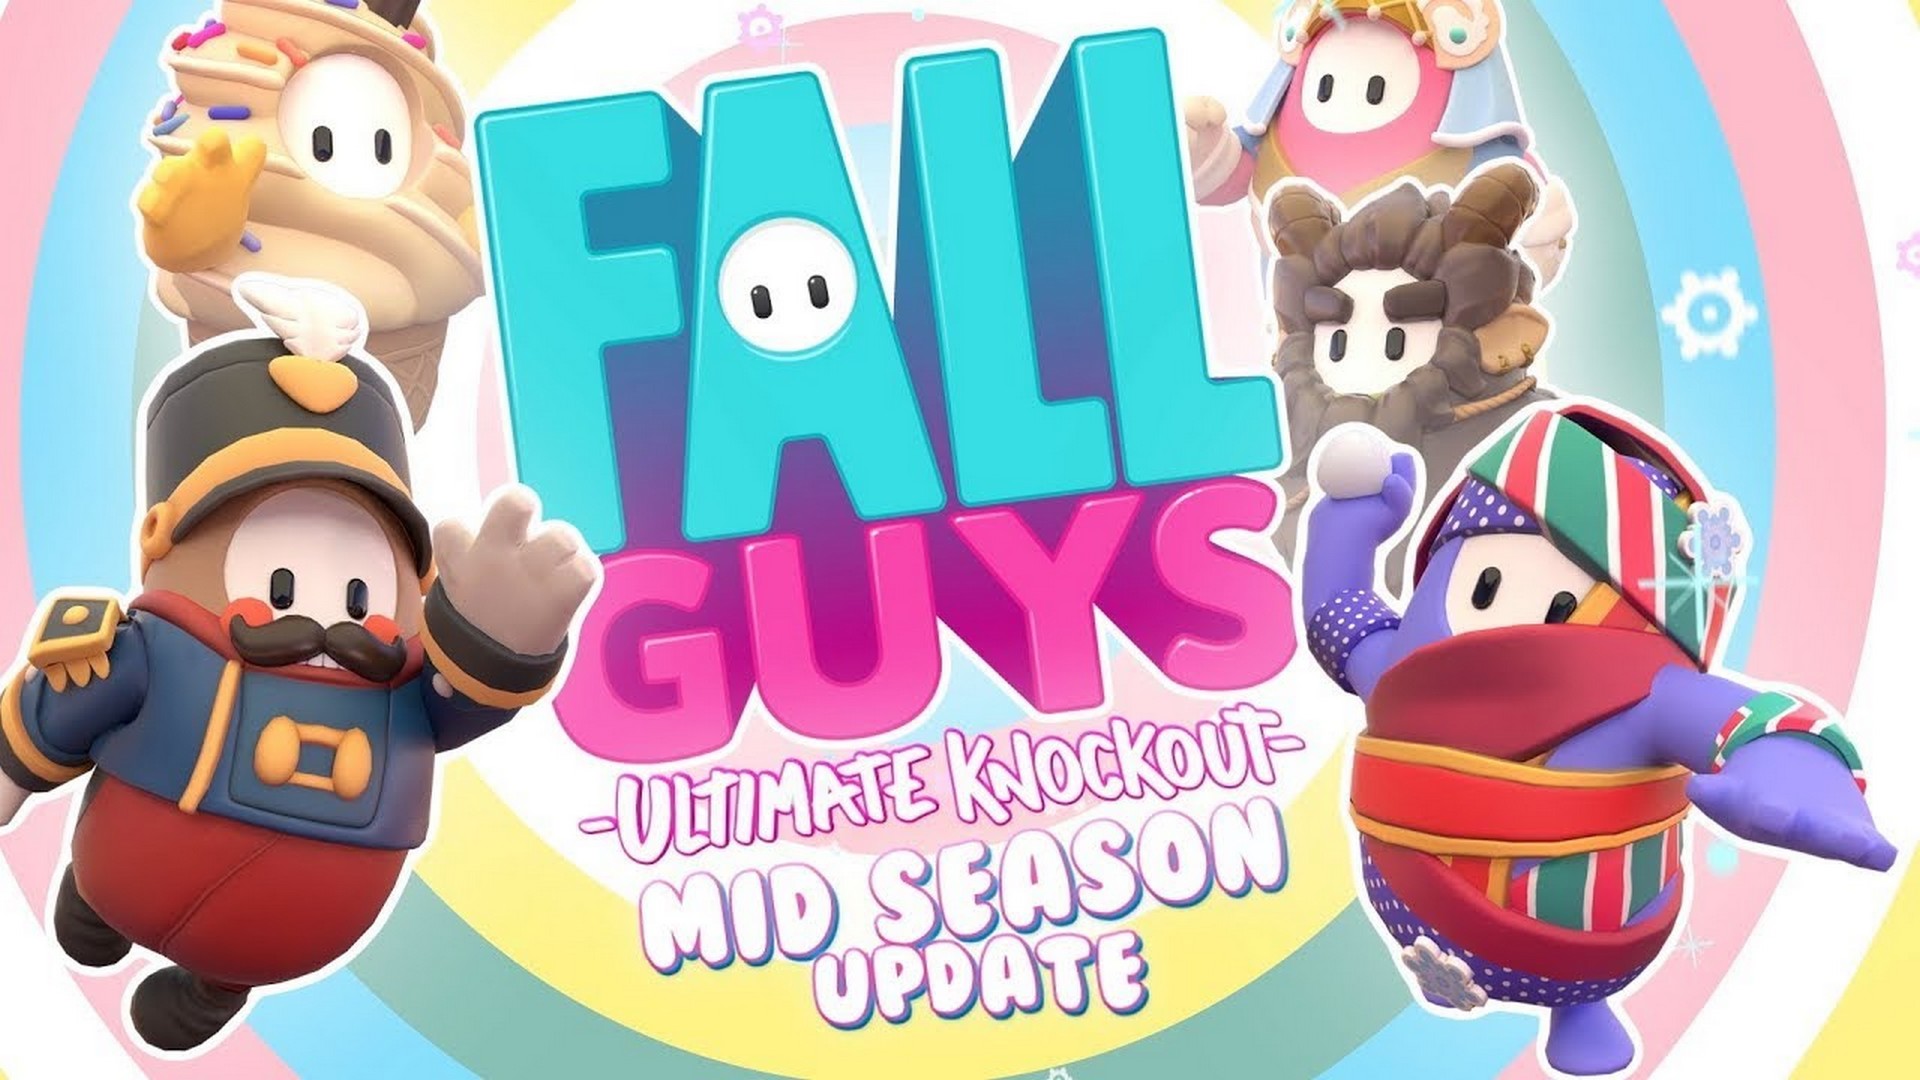 Fall Guys Season 3.5 Delivers a Hefty Haul Of Updates